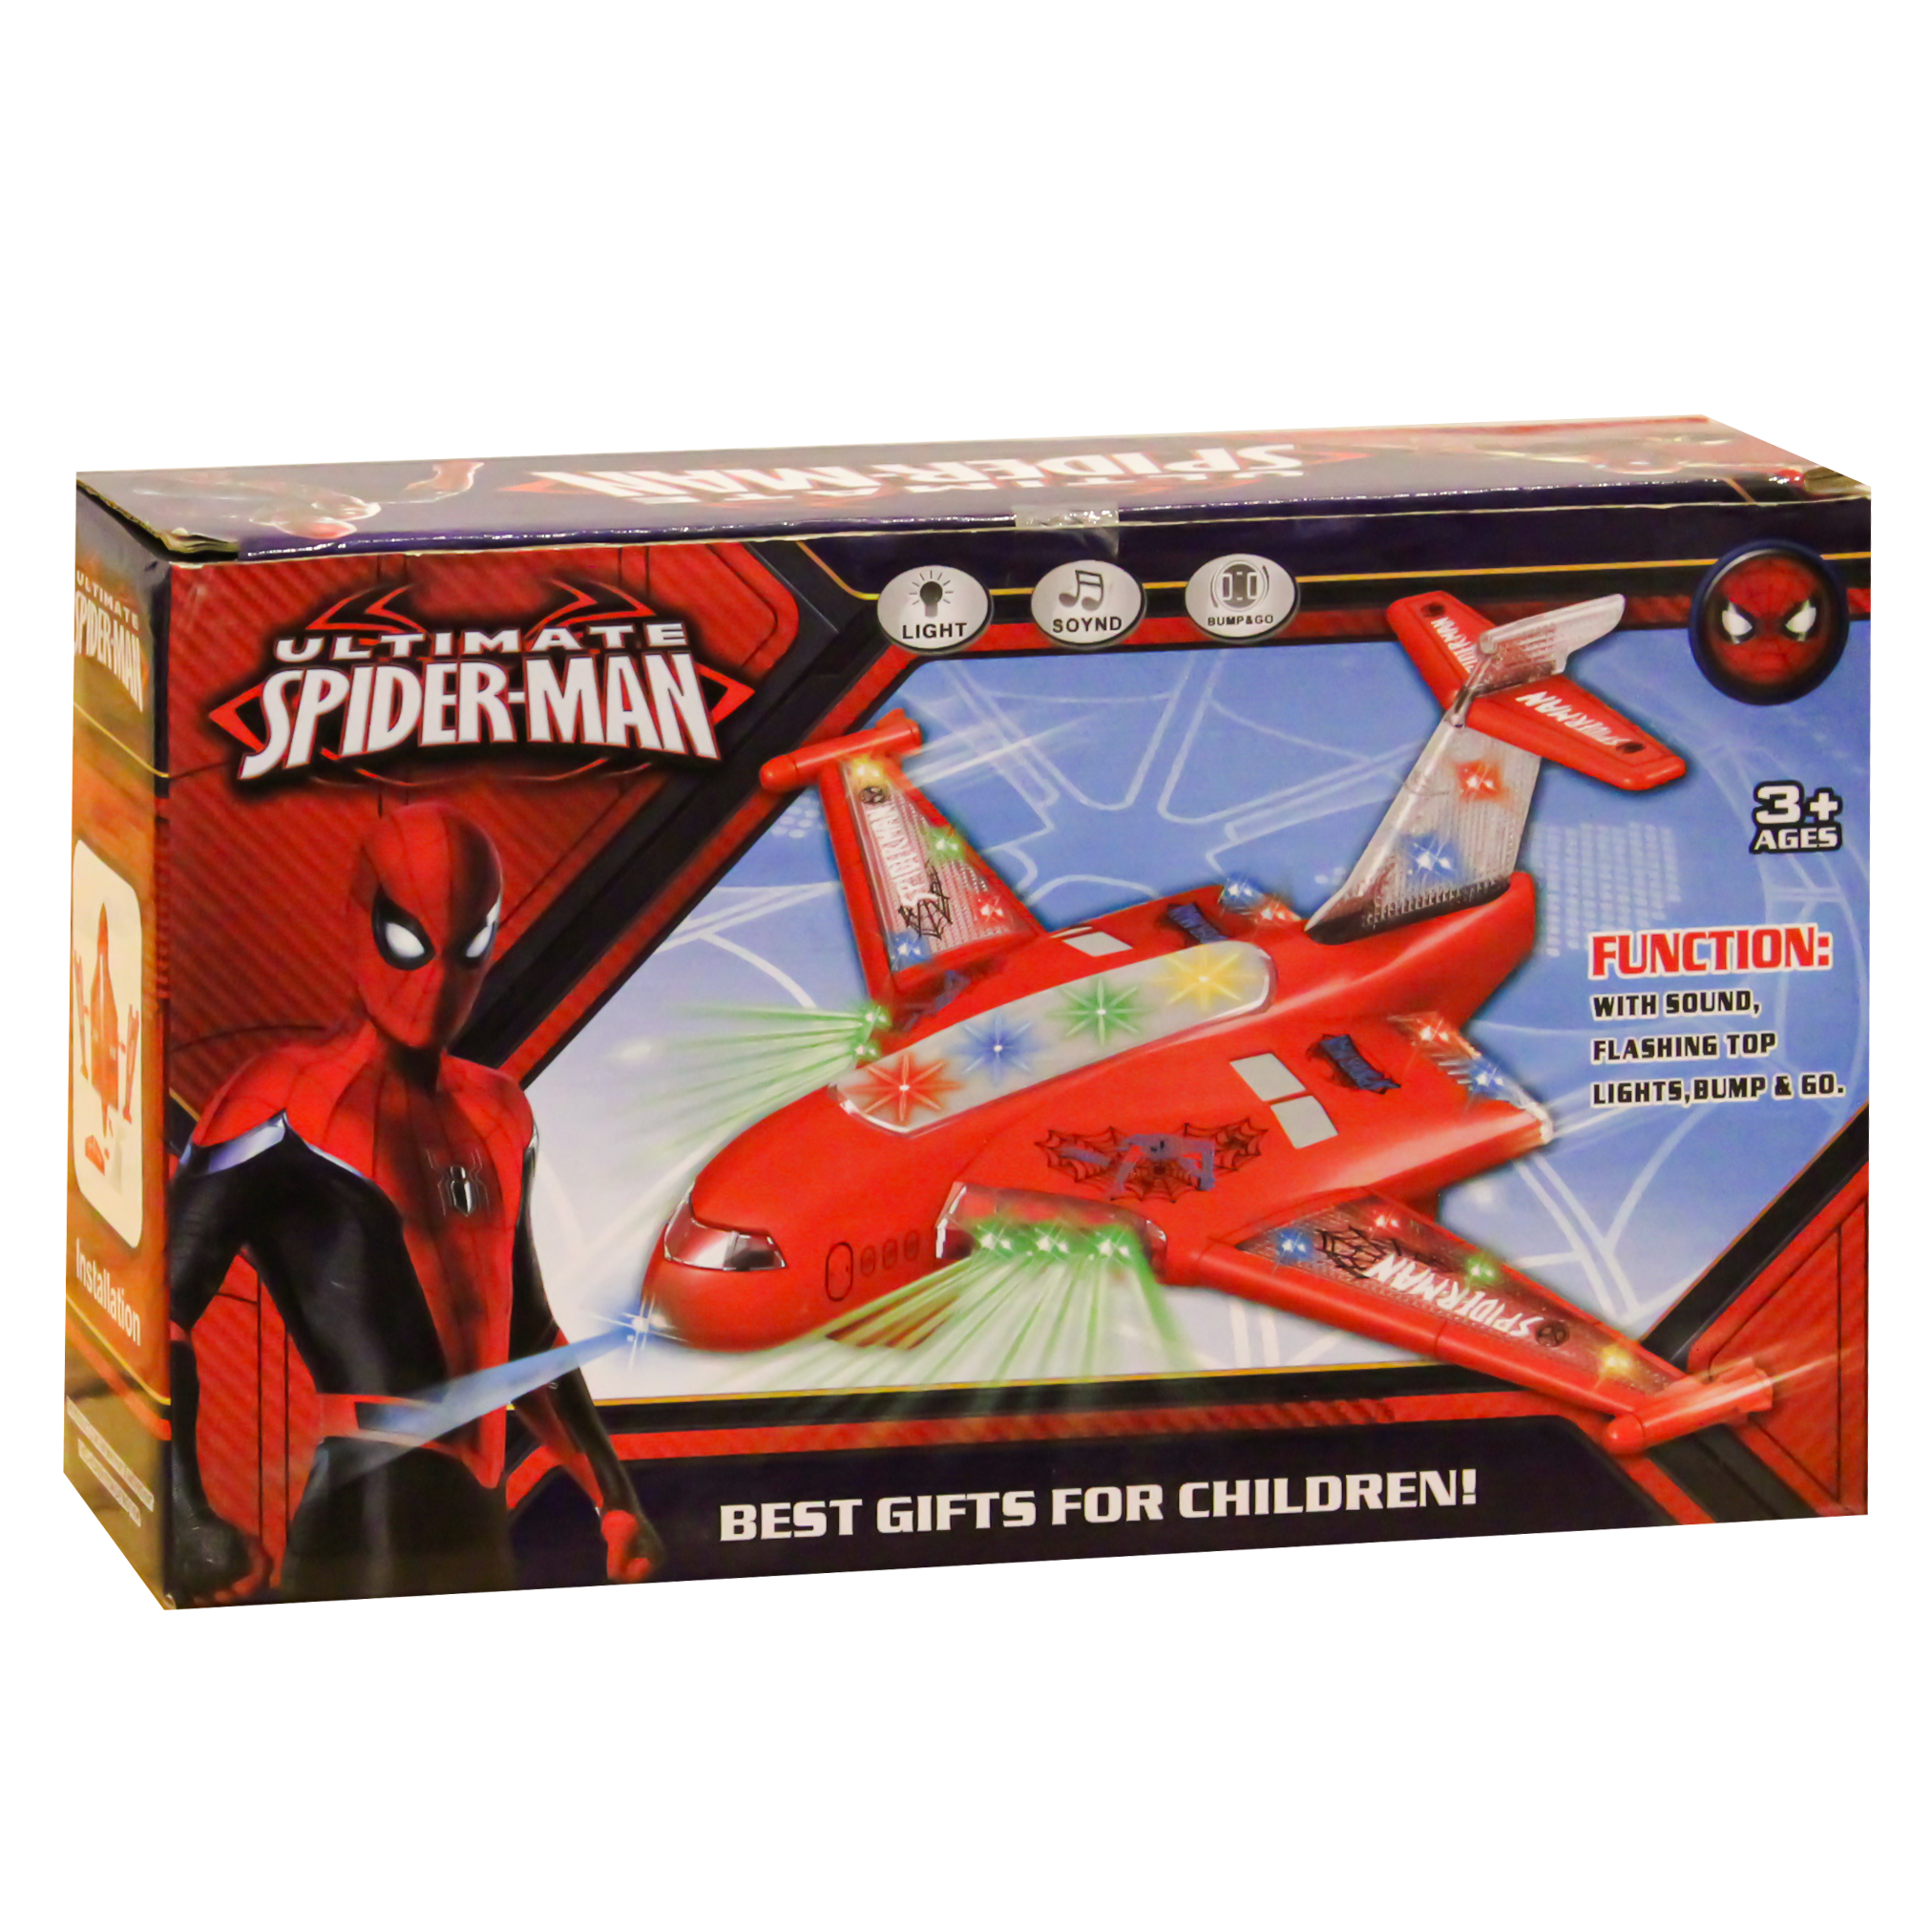 Airplane Spiderman Theme with Lights & Sound +3